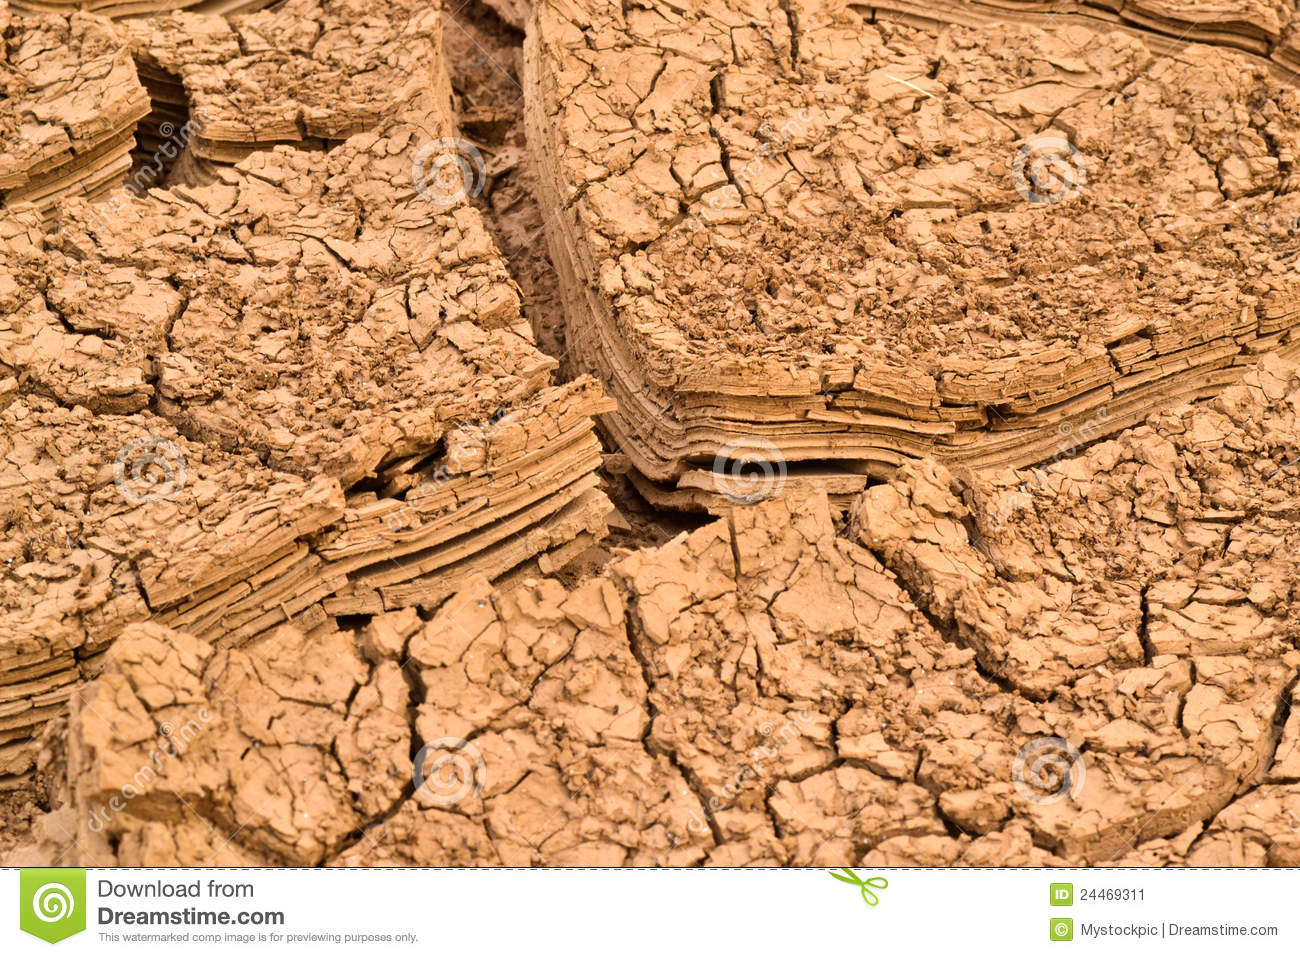 More Similar Stock Images Of   Rock Strata Layers Of The Soil